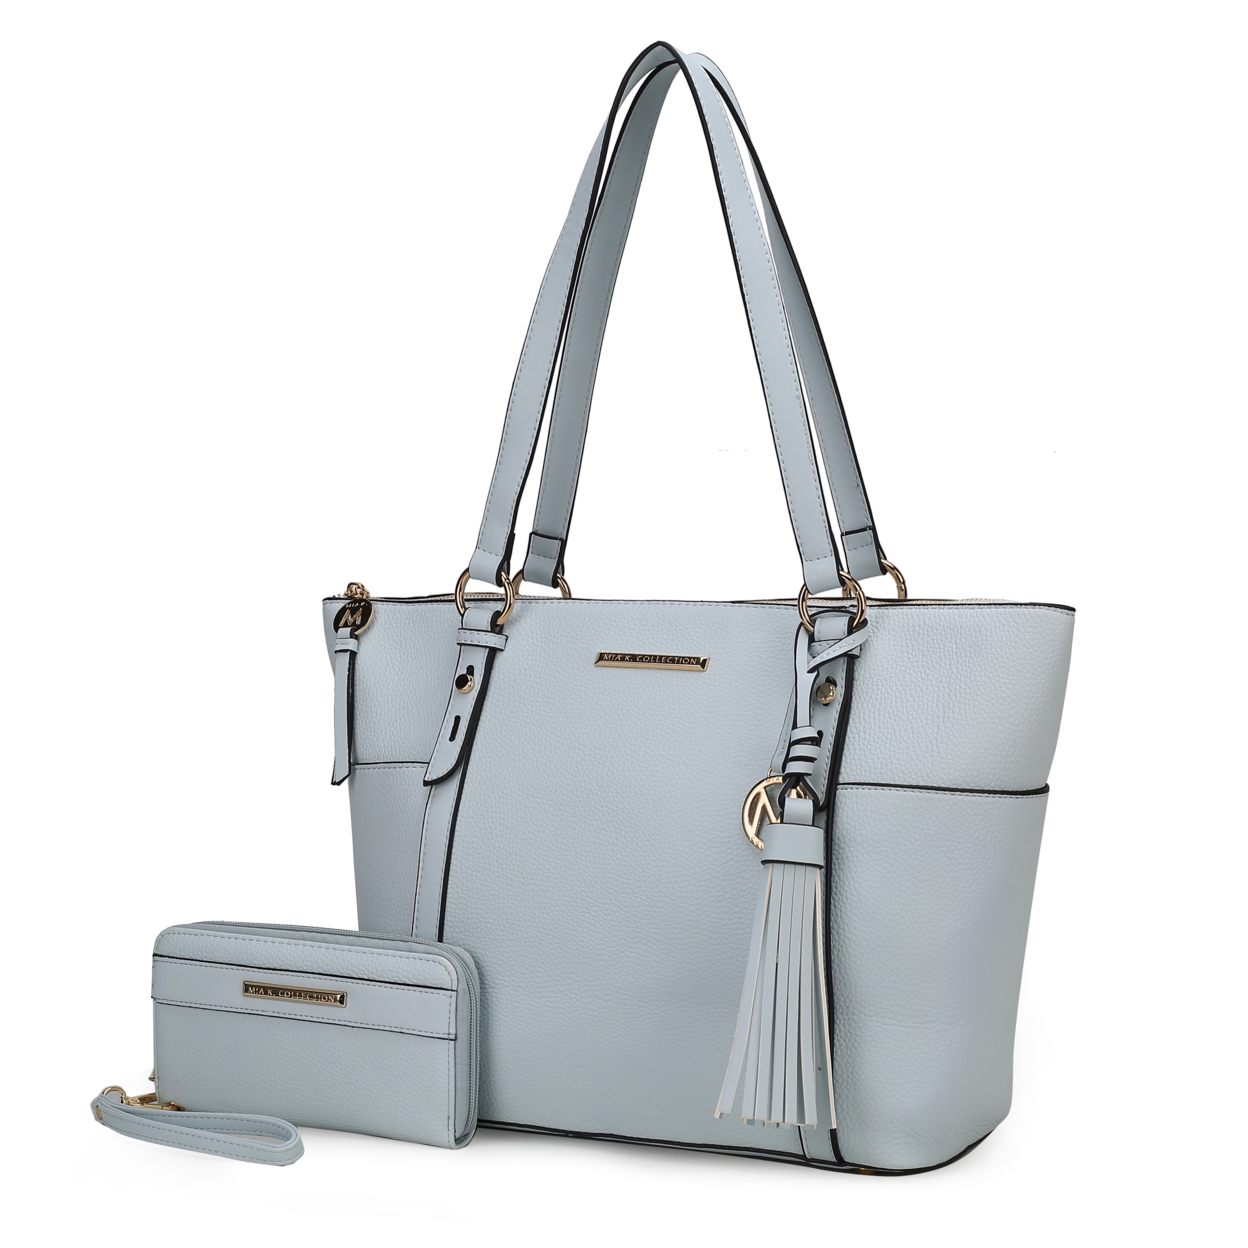 MKF Collection Gloria Vegan Leather Women's Tote Bag By Mia K With Wallet -2 Pieces - Light Blue